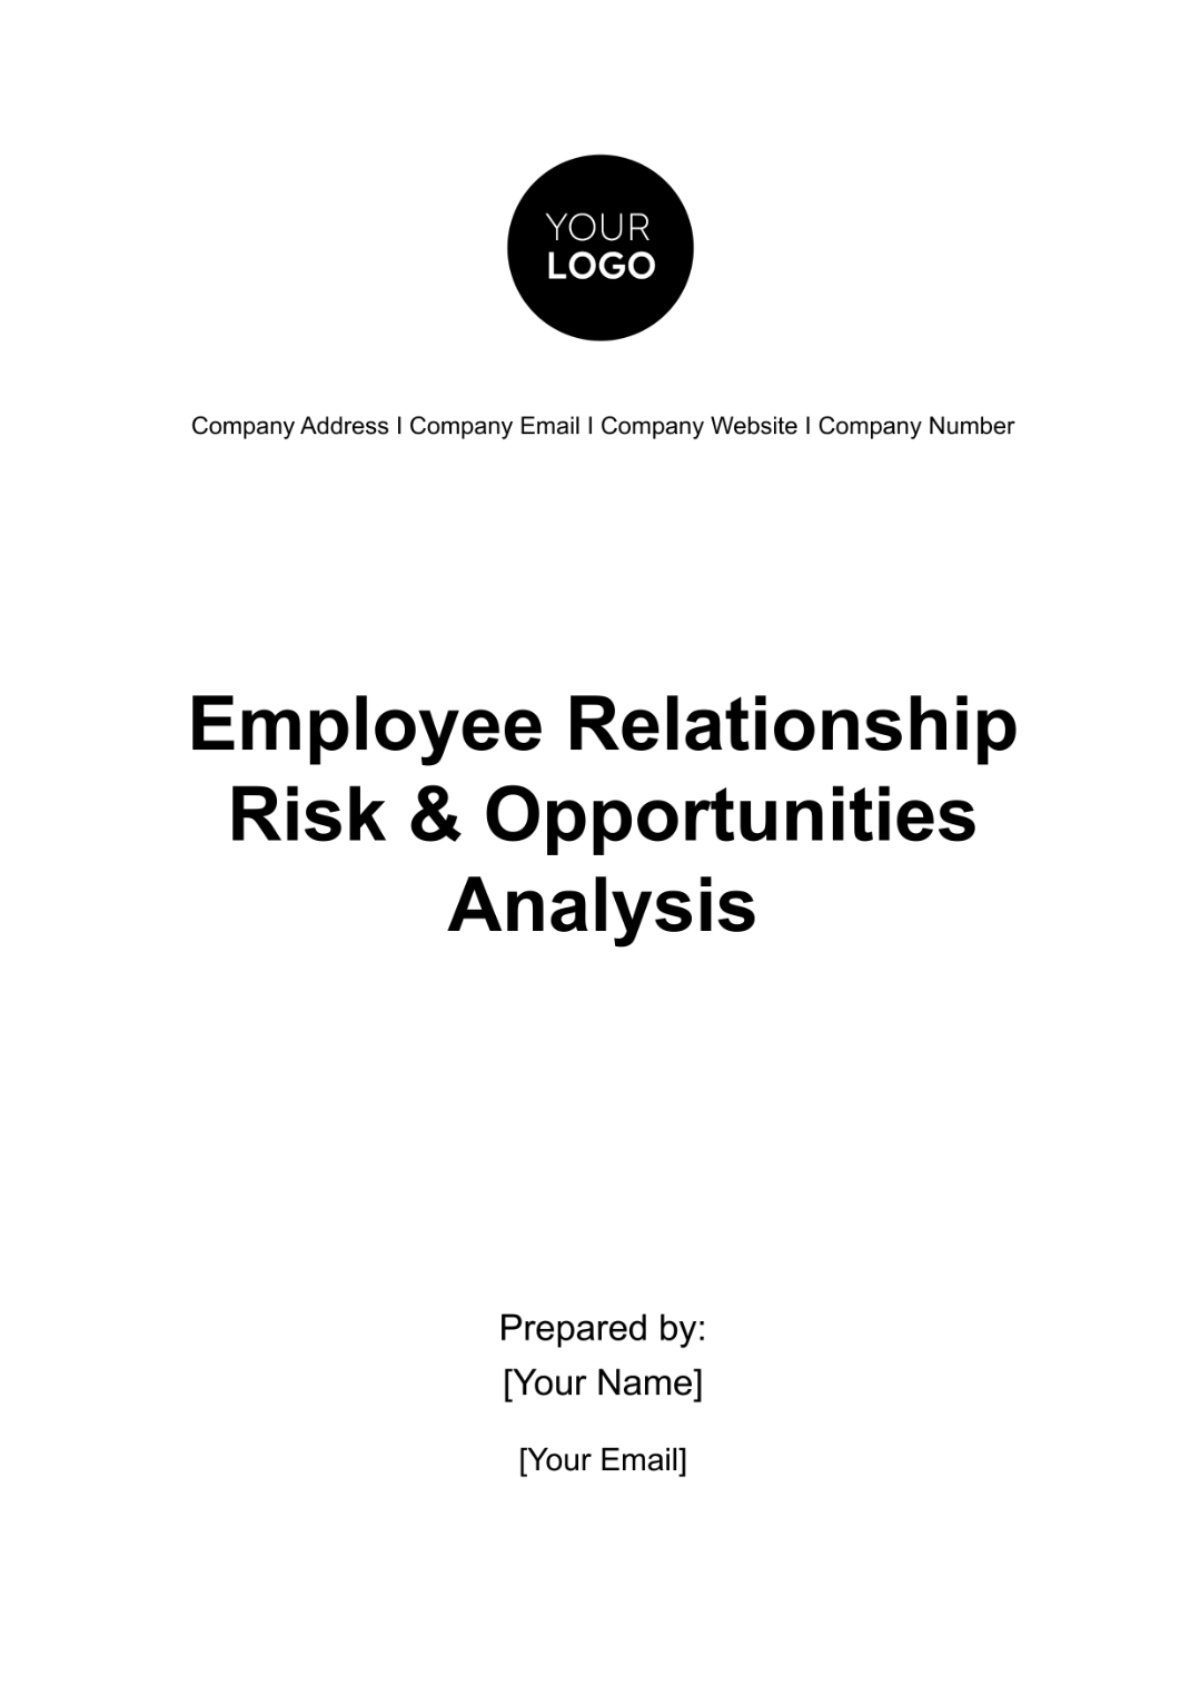 Free Employee Relationship Risk & Opportunities Analysis HR Template